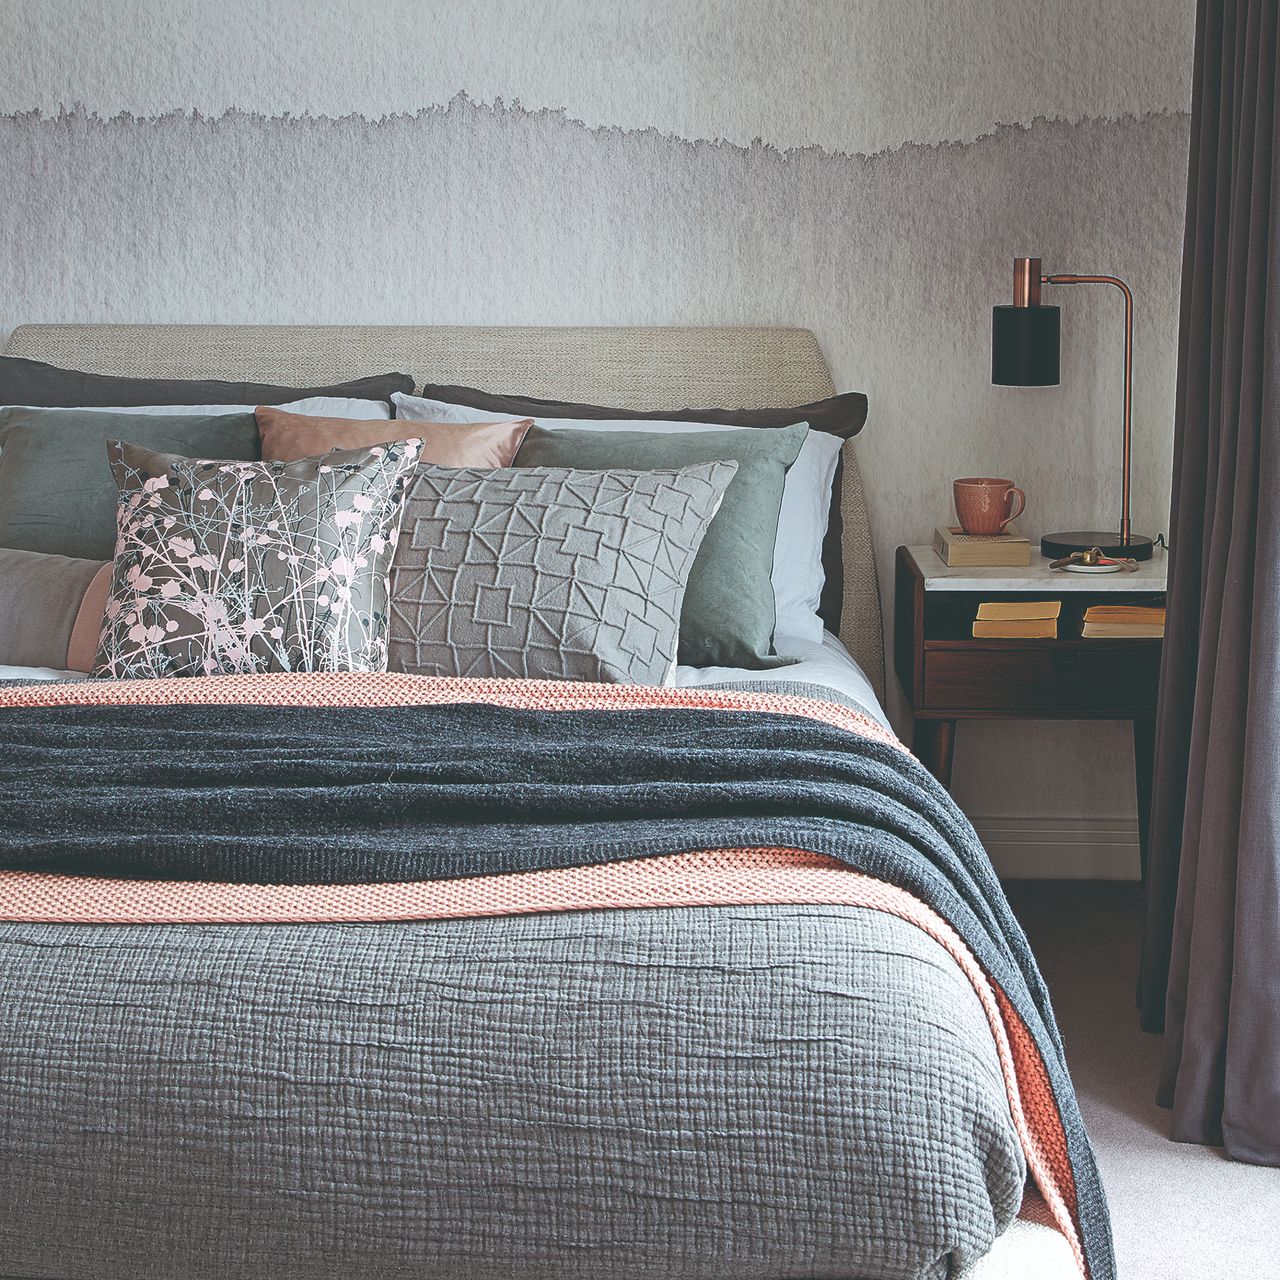 10 grey bed ideas to help you fall asleep in style | Ideal Home